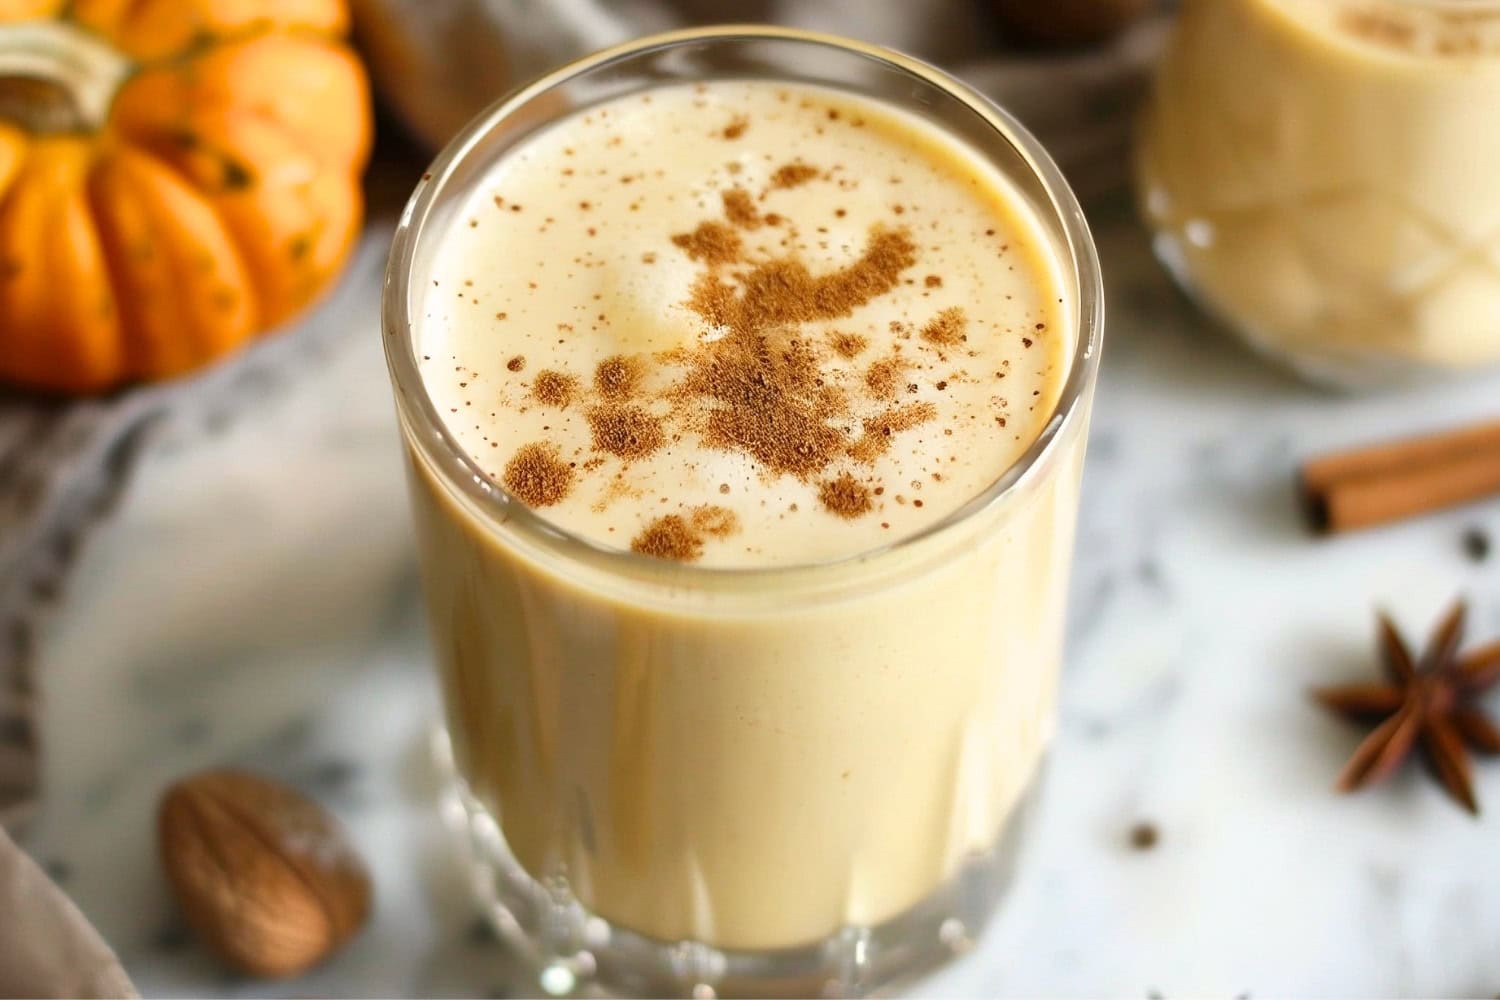 Spicy and creamy pumpkin eggnog in a glass with powdered nutmeg